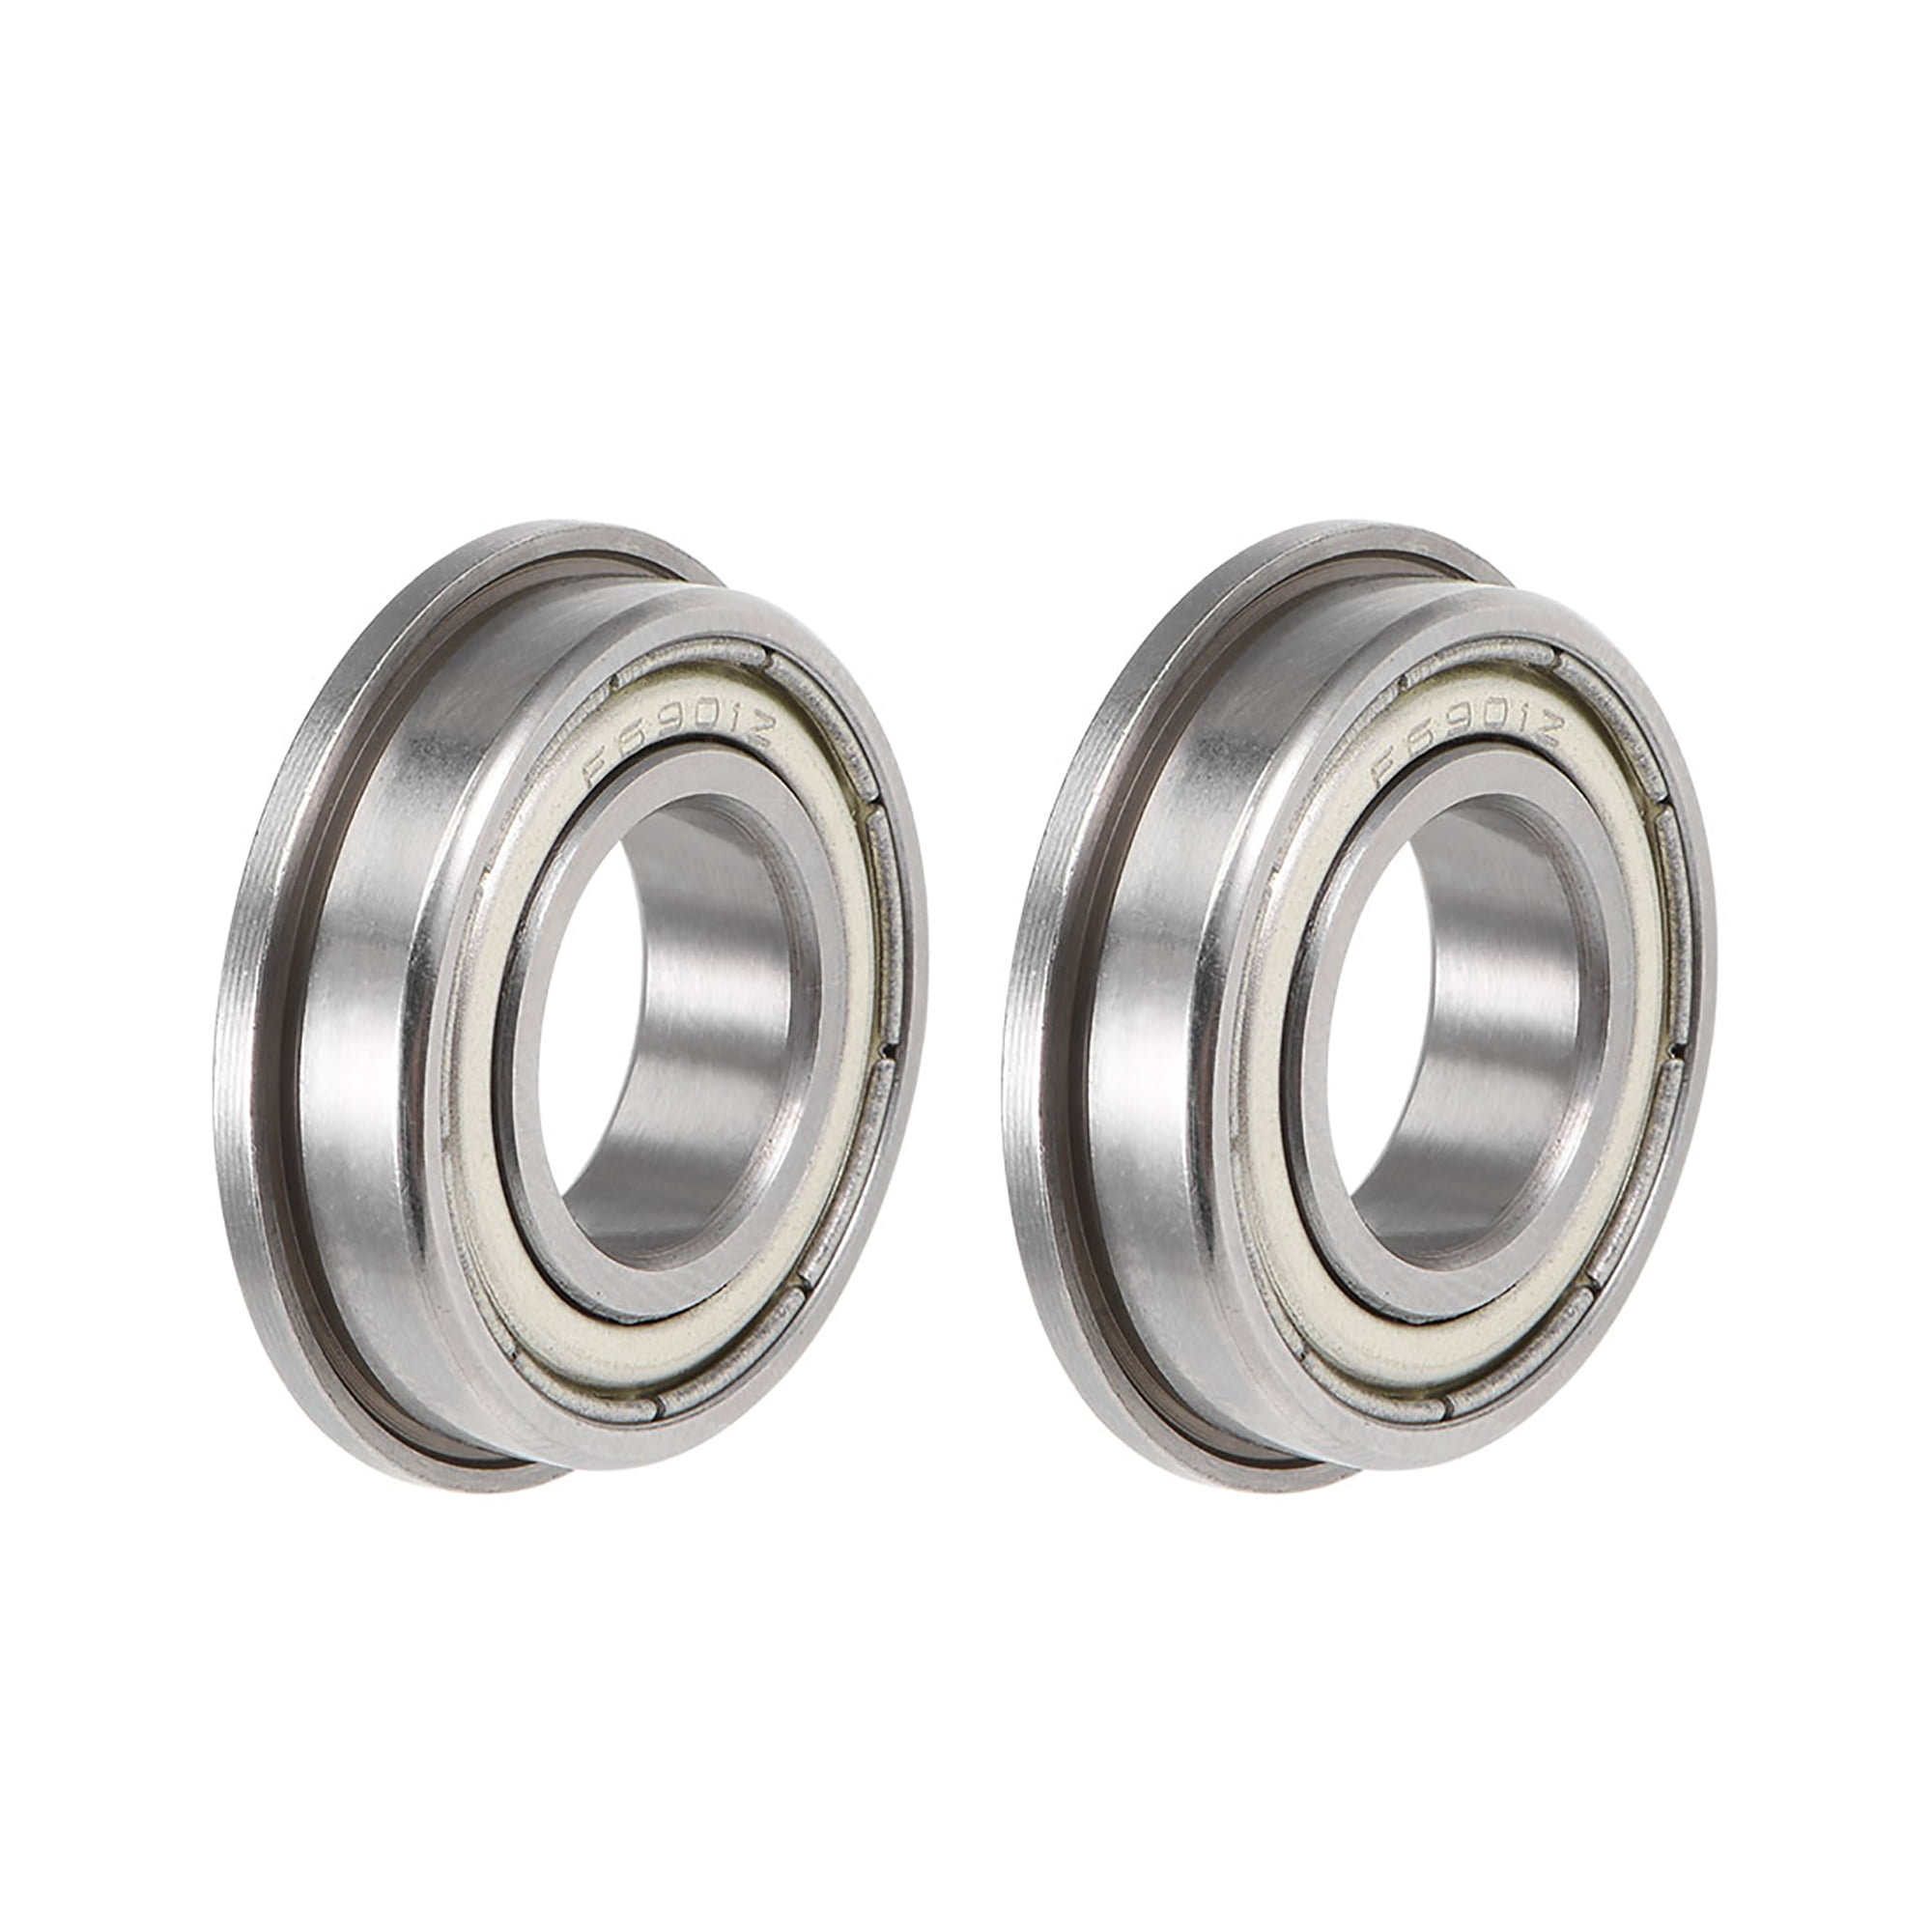 12mm*24mm*6mm 5 x F6901zz Metal Double Shielded  Flanged  Ball Bearings